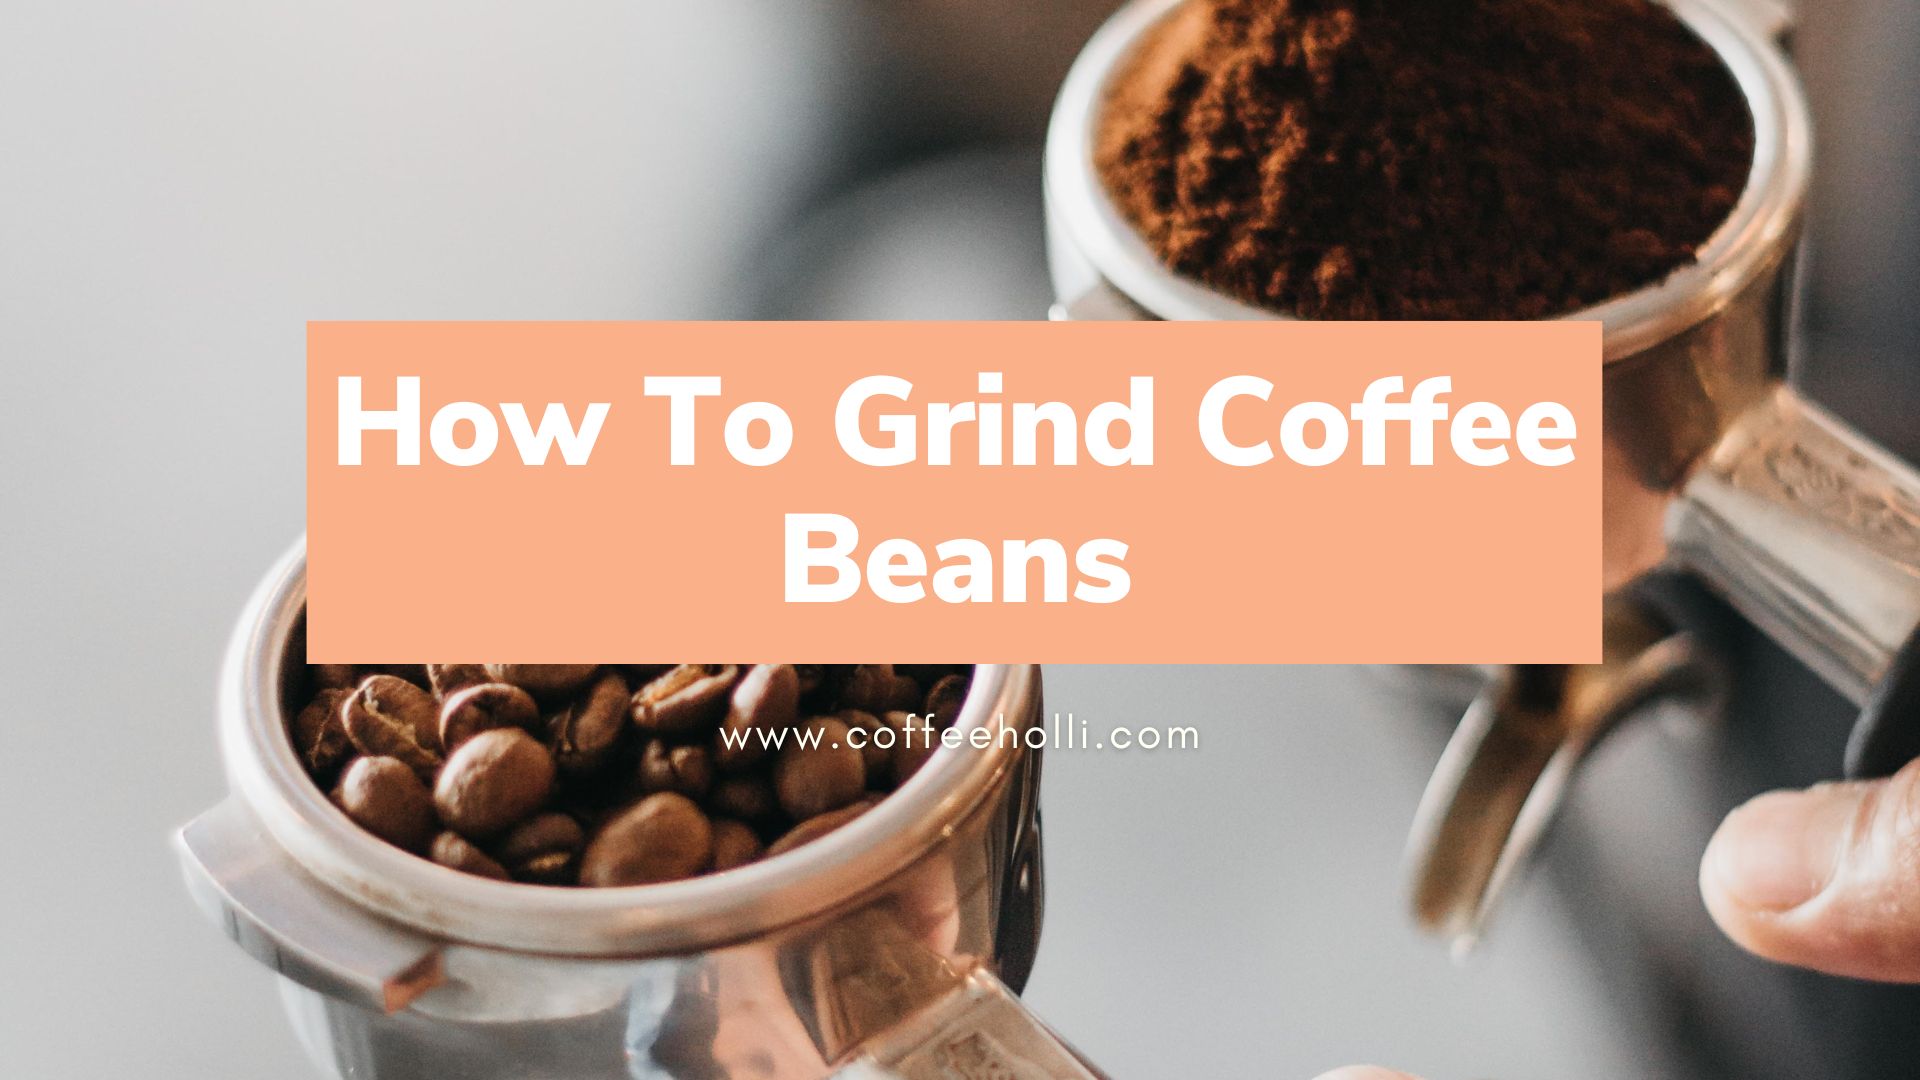 How To Grind Coffee Beans